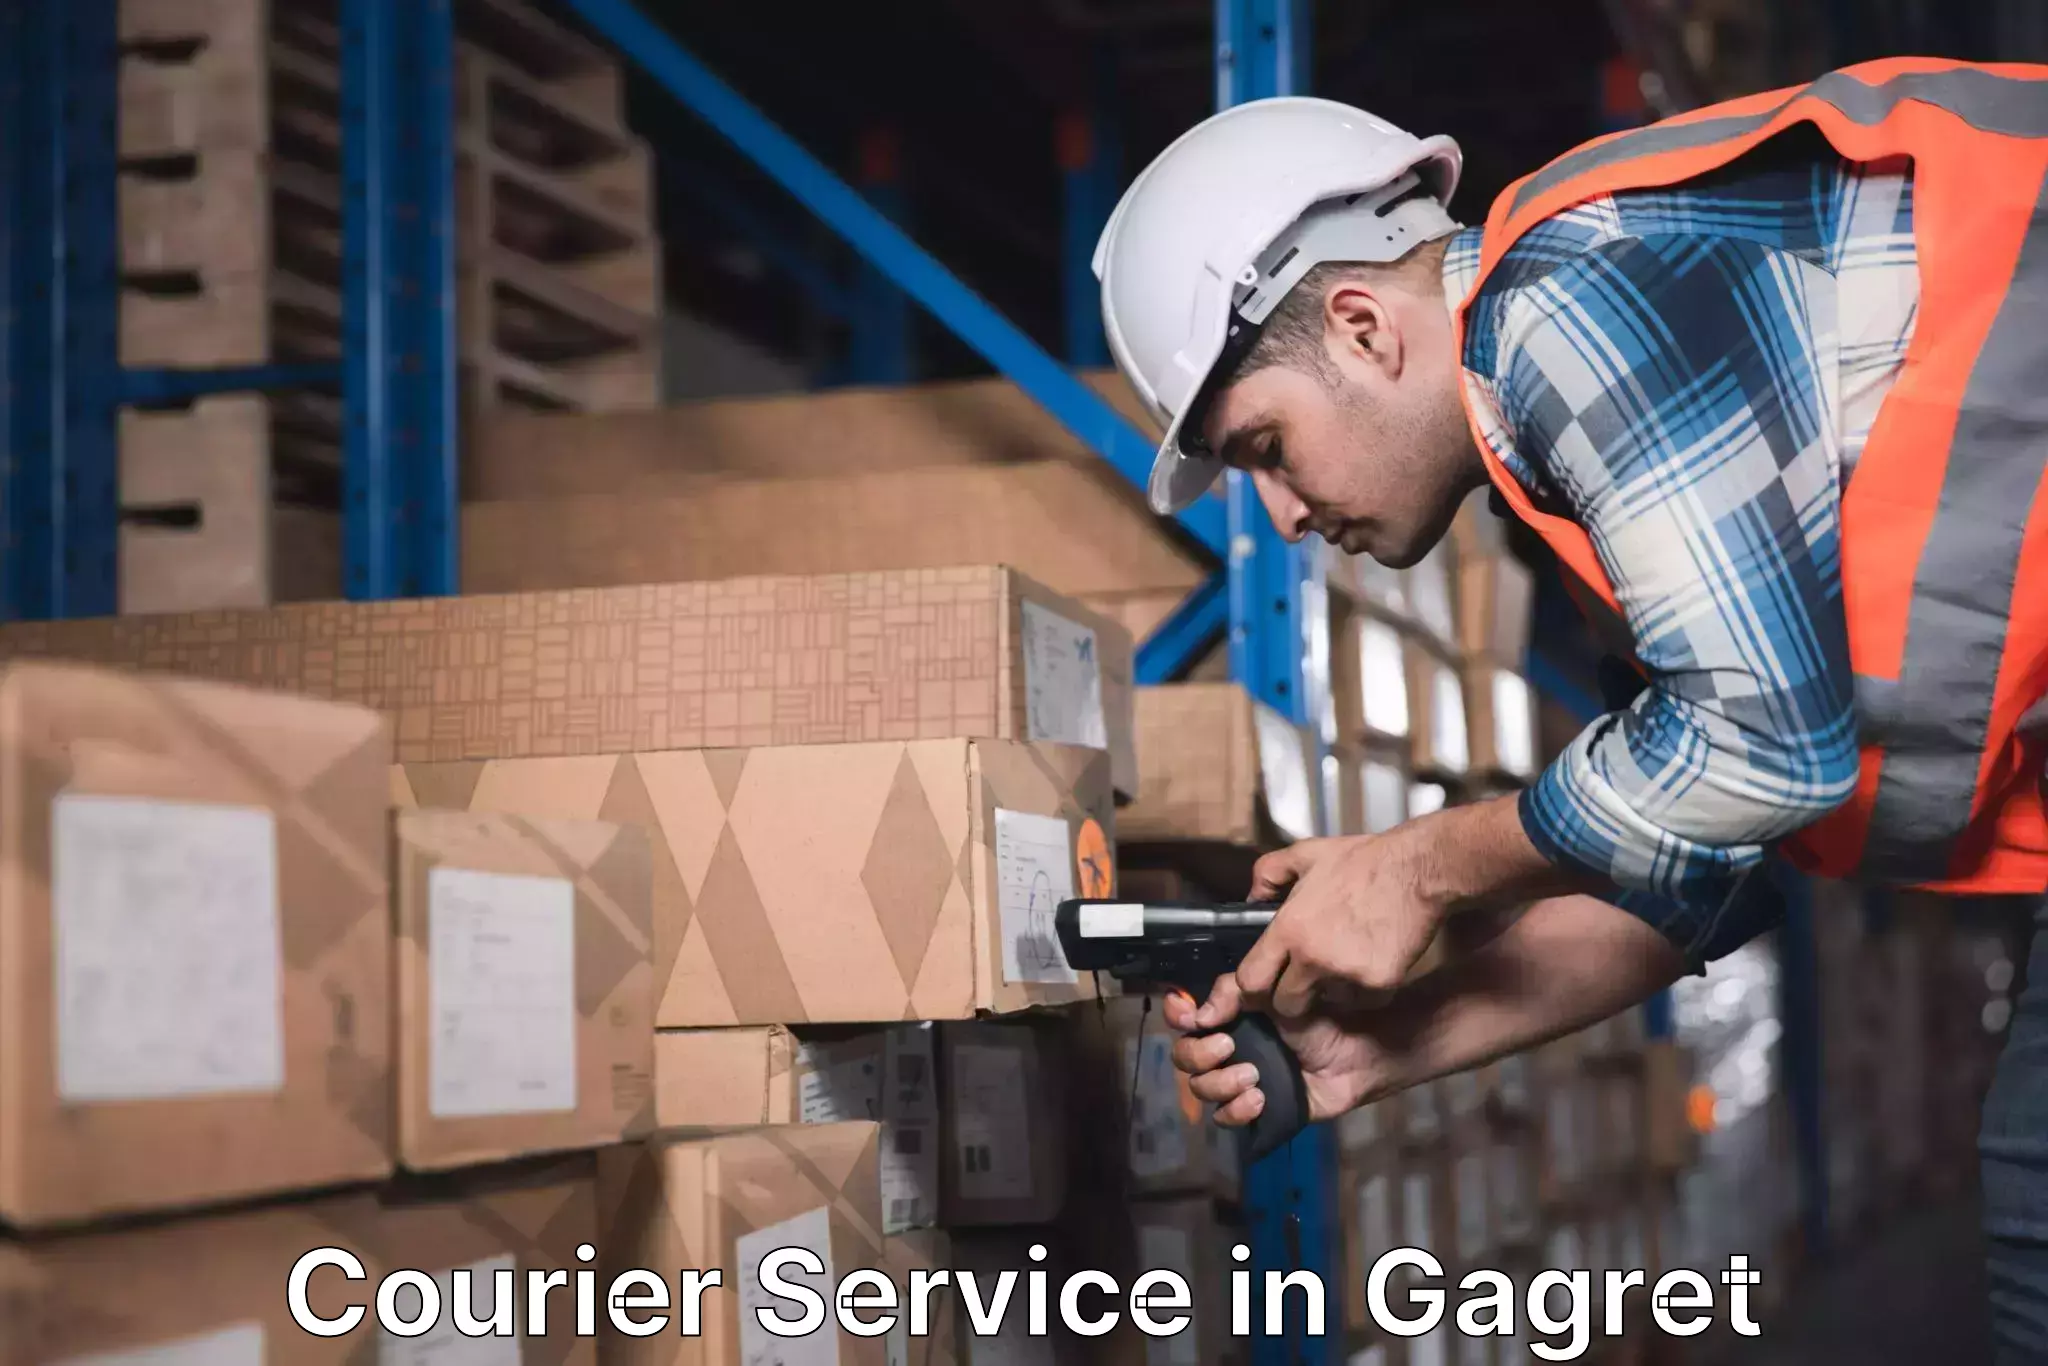 Customer-friendly courier services in Gagret